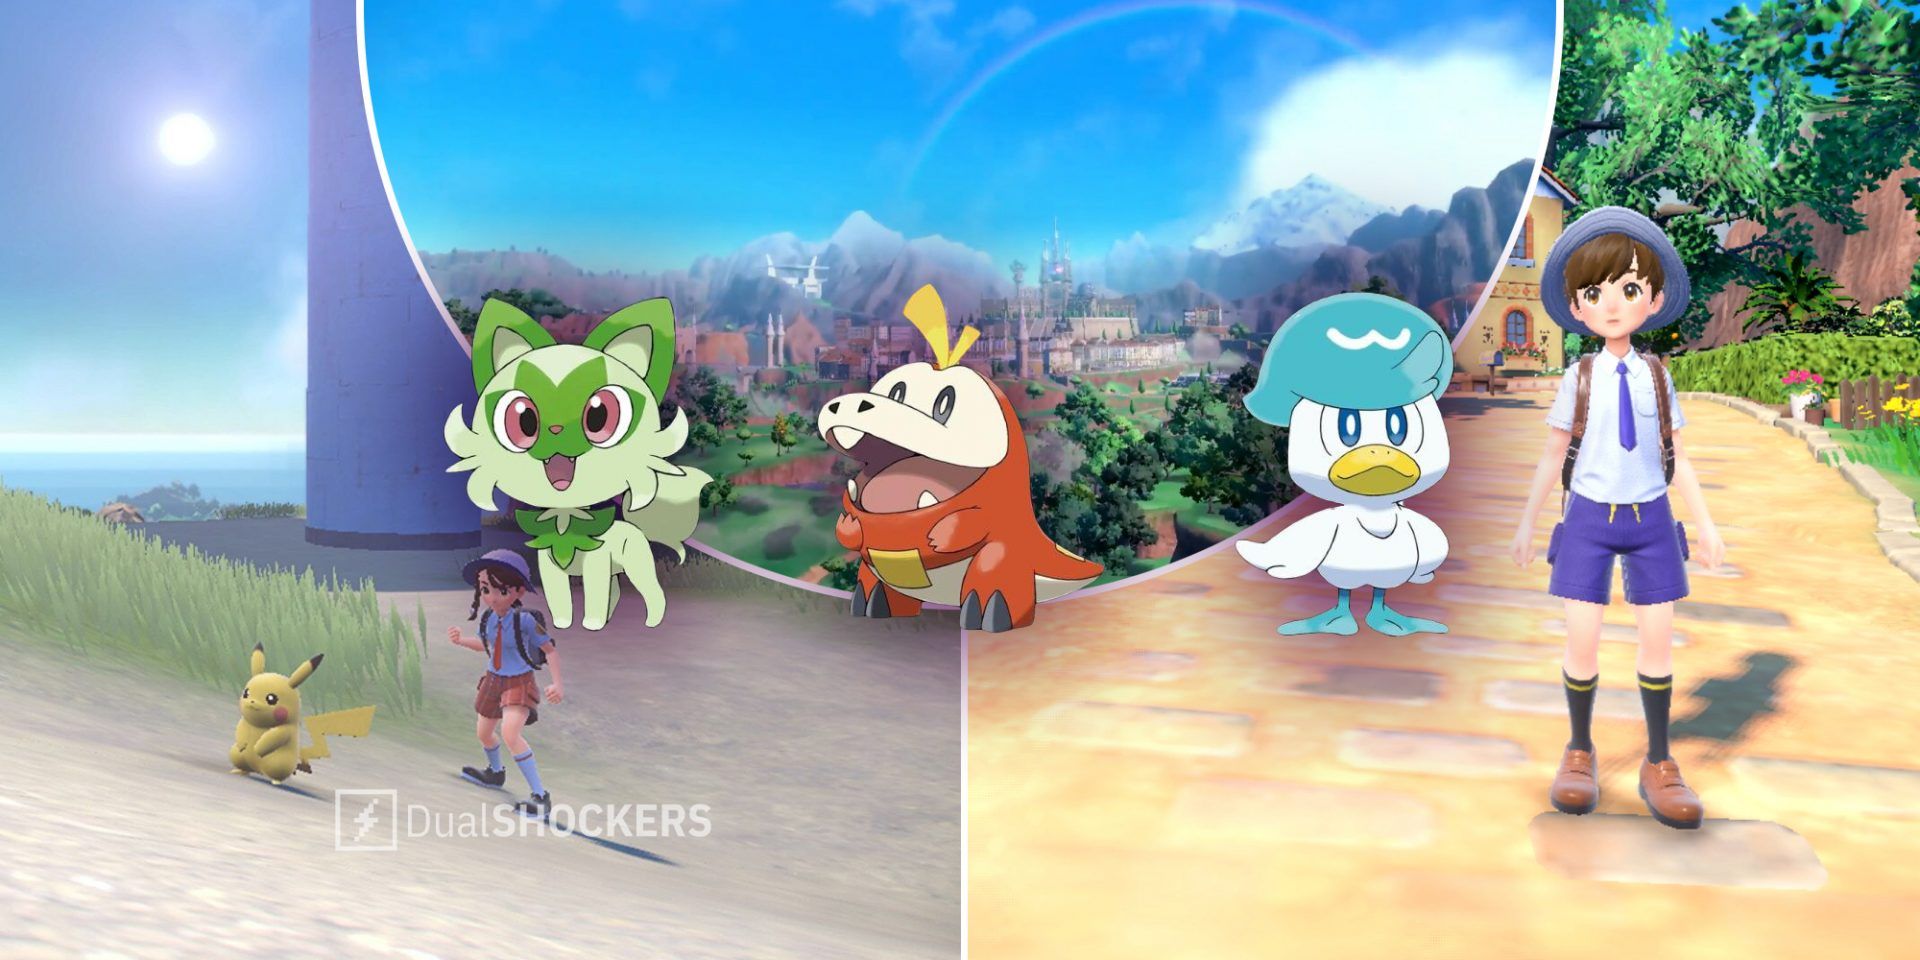 Pokemon Scarlet and Violet character with Pikachu on left, Pokemon Scarlet and Violet starters Sprigatito, Fuecoco, and Quaxly in middle, one of the characters from Pokemon Violet on right